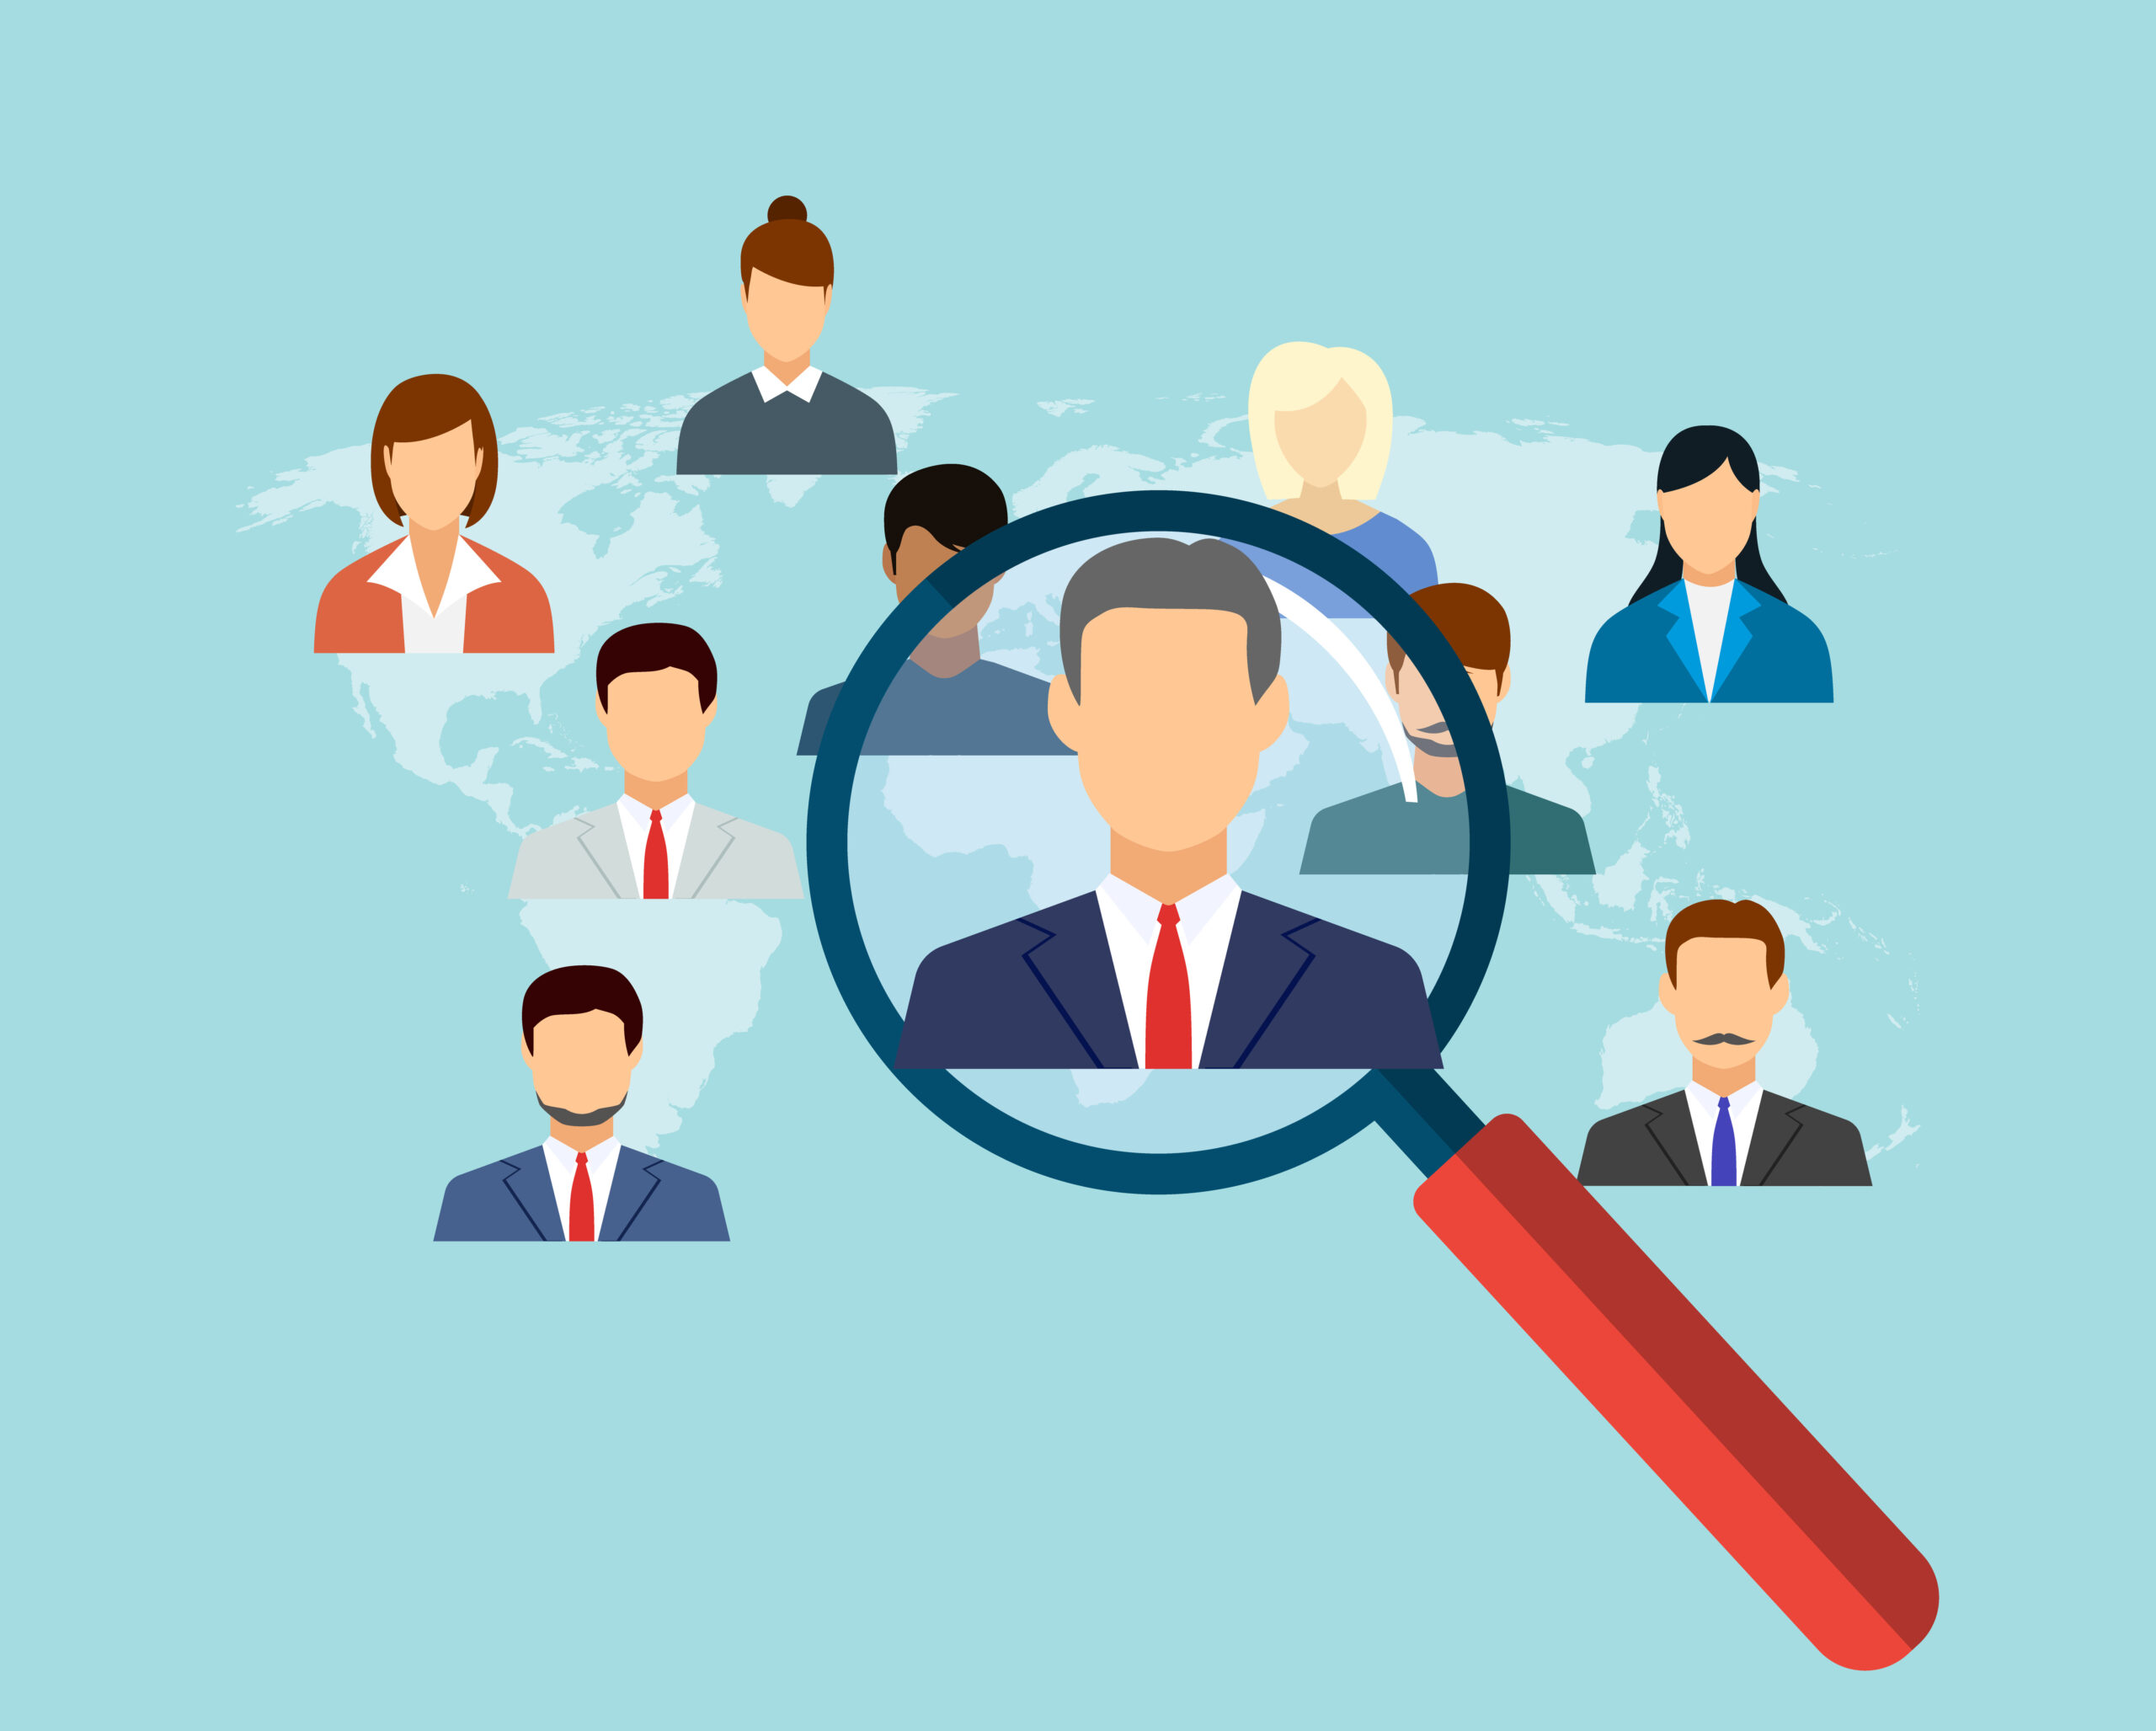 Magnifying Glass For Choosing The Right Person On Word Map For International Best Position. Recruitment And Job Search Concept. Vector Illustration In Flat Design